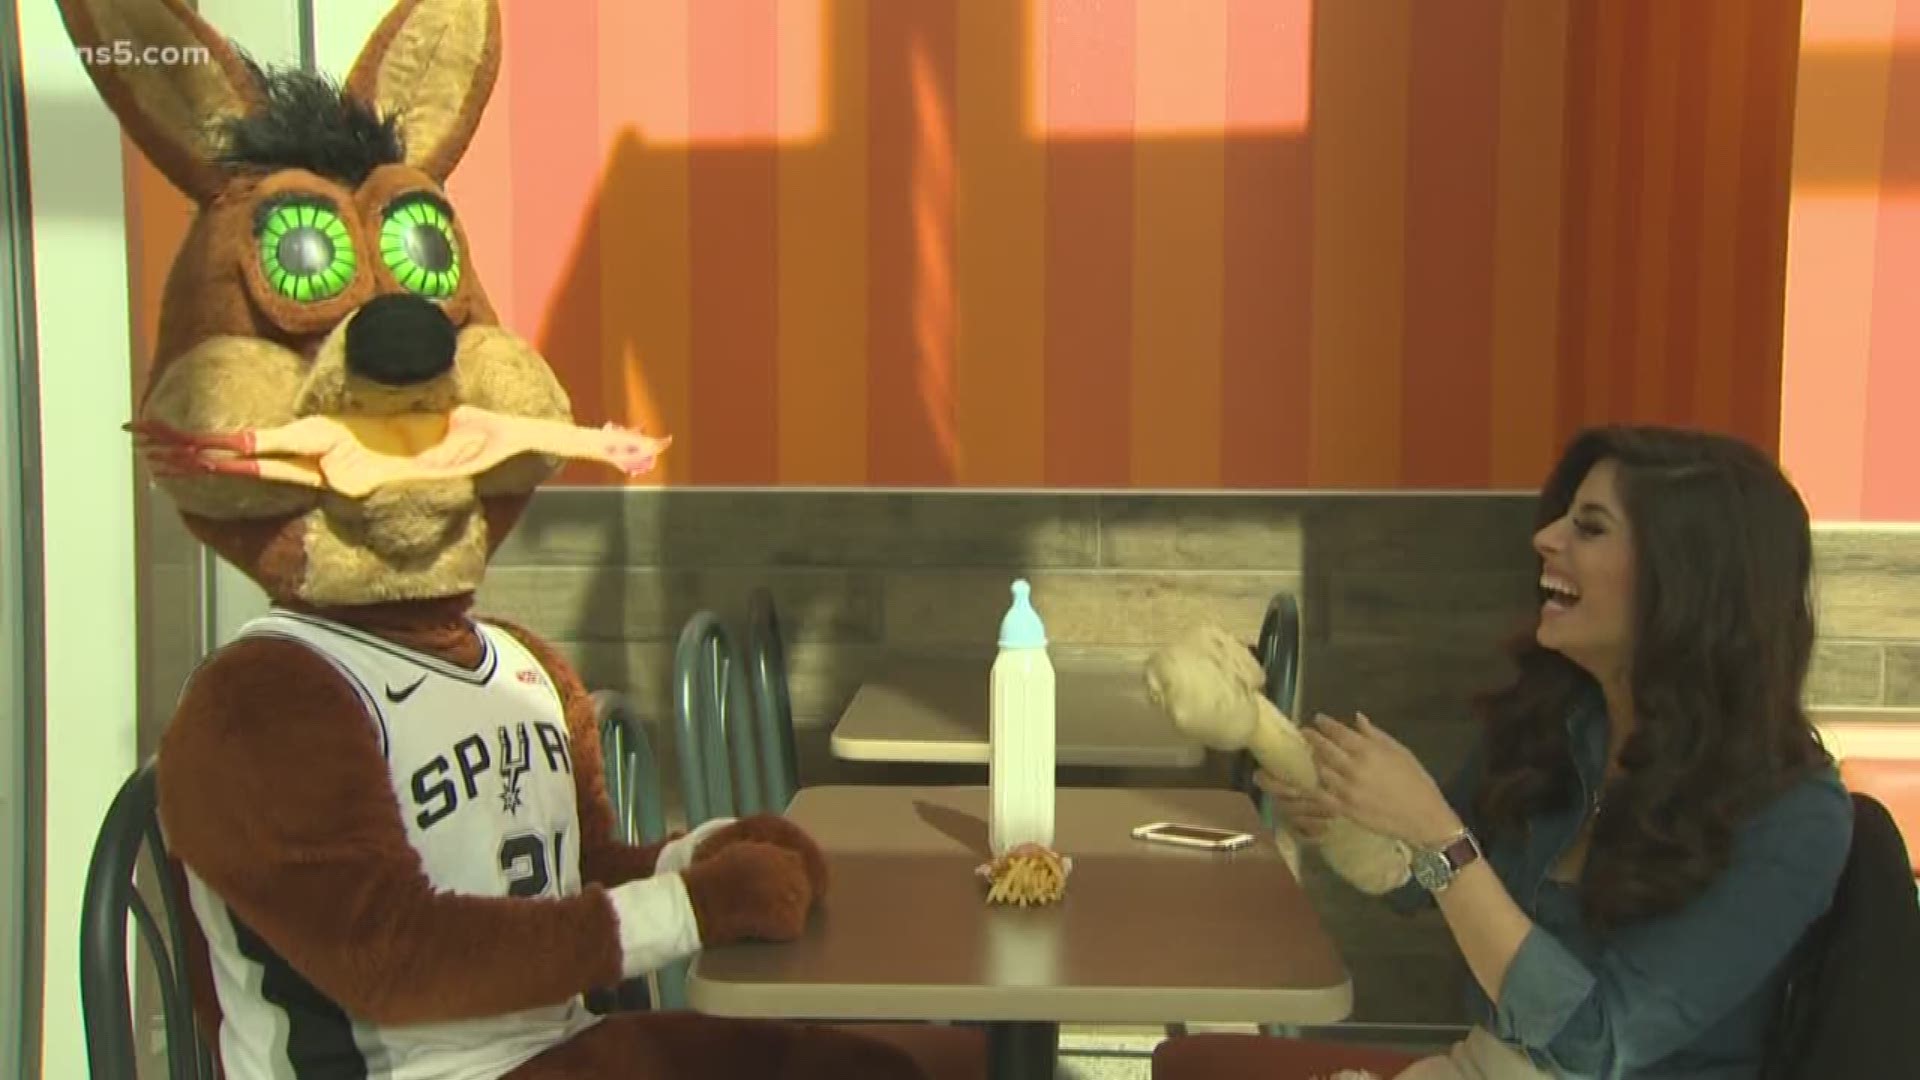 It's no surprise the Spurs are loved in San Antonio, and so is their mascot, the Spurs Coyote! But have you ever wondered what the fluffy guy does on a day-to-day basis?